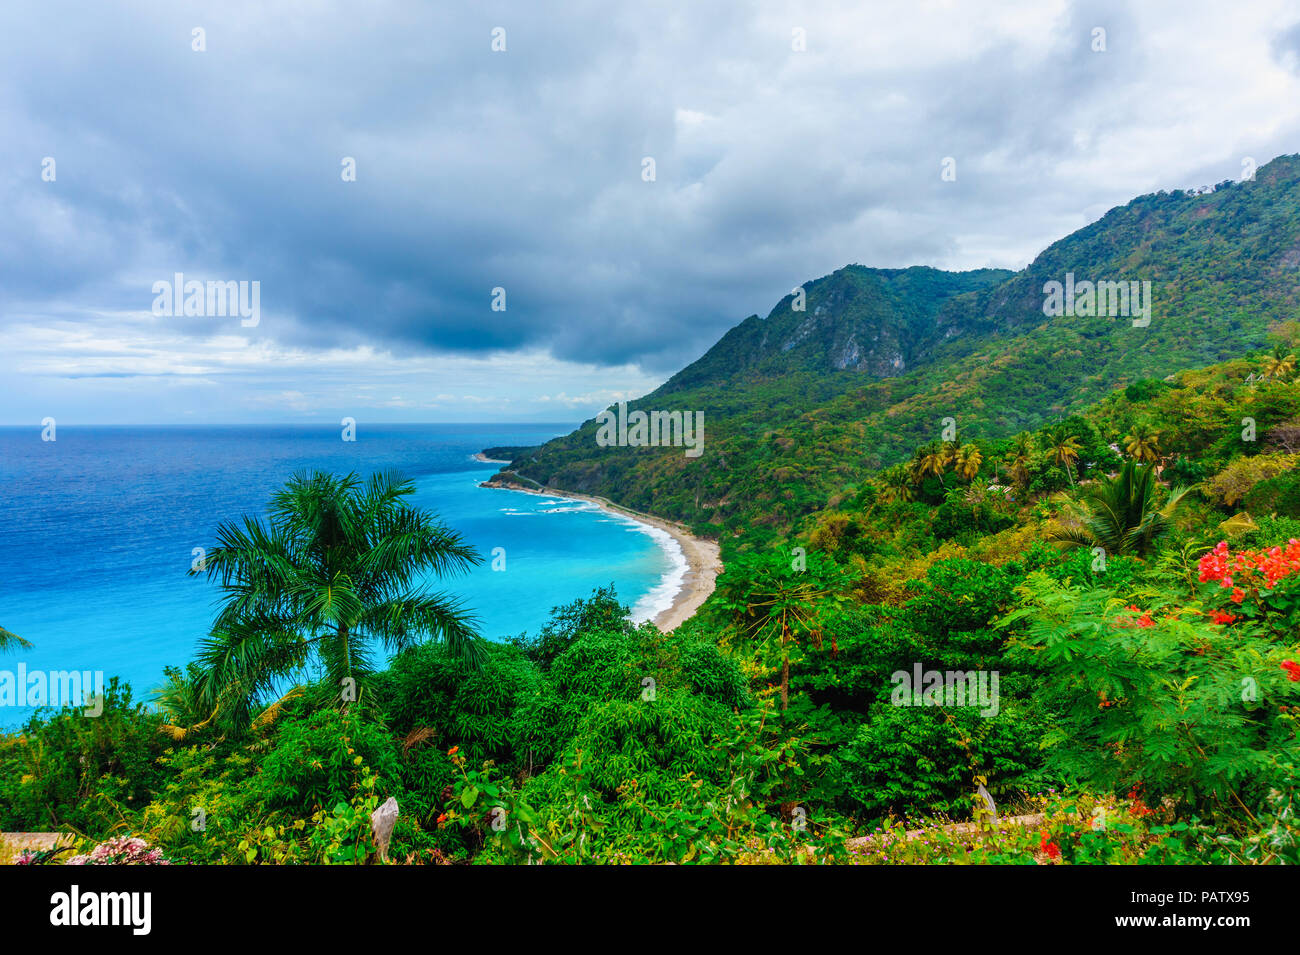 picturesque natural wild landscape with rocky mountains overgrown dense green jungle tree, palm and clear azure water of sea ocean. Dominican Republic Stock Photo